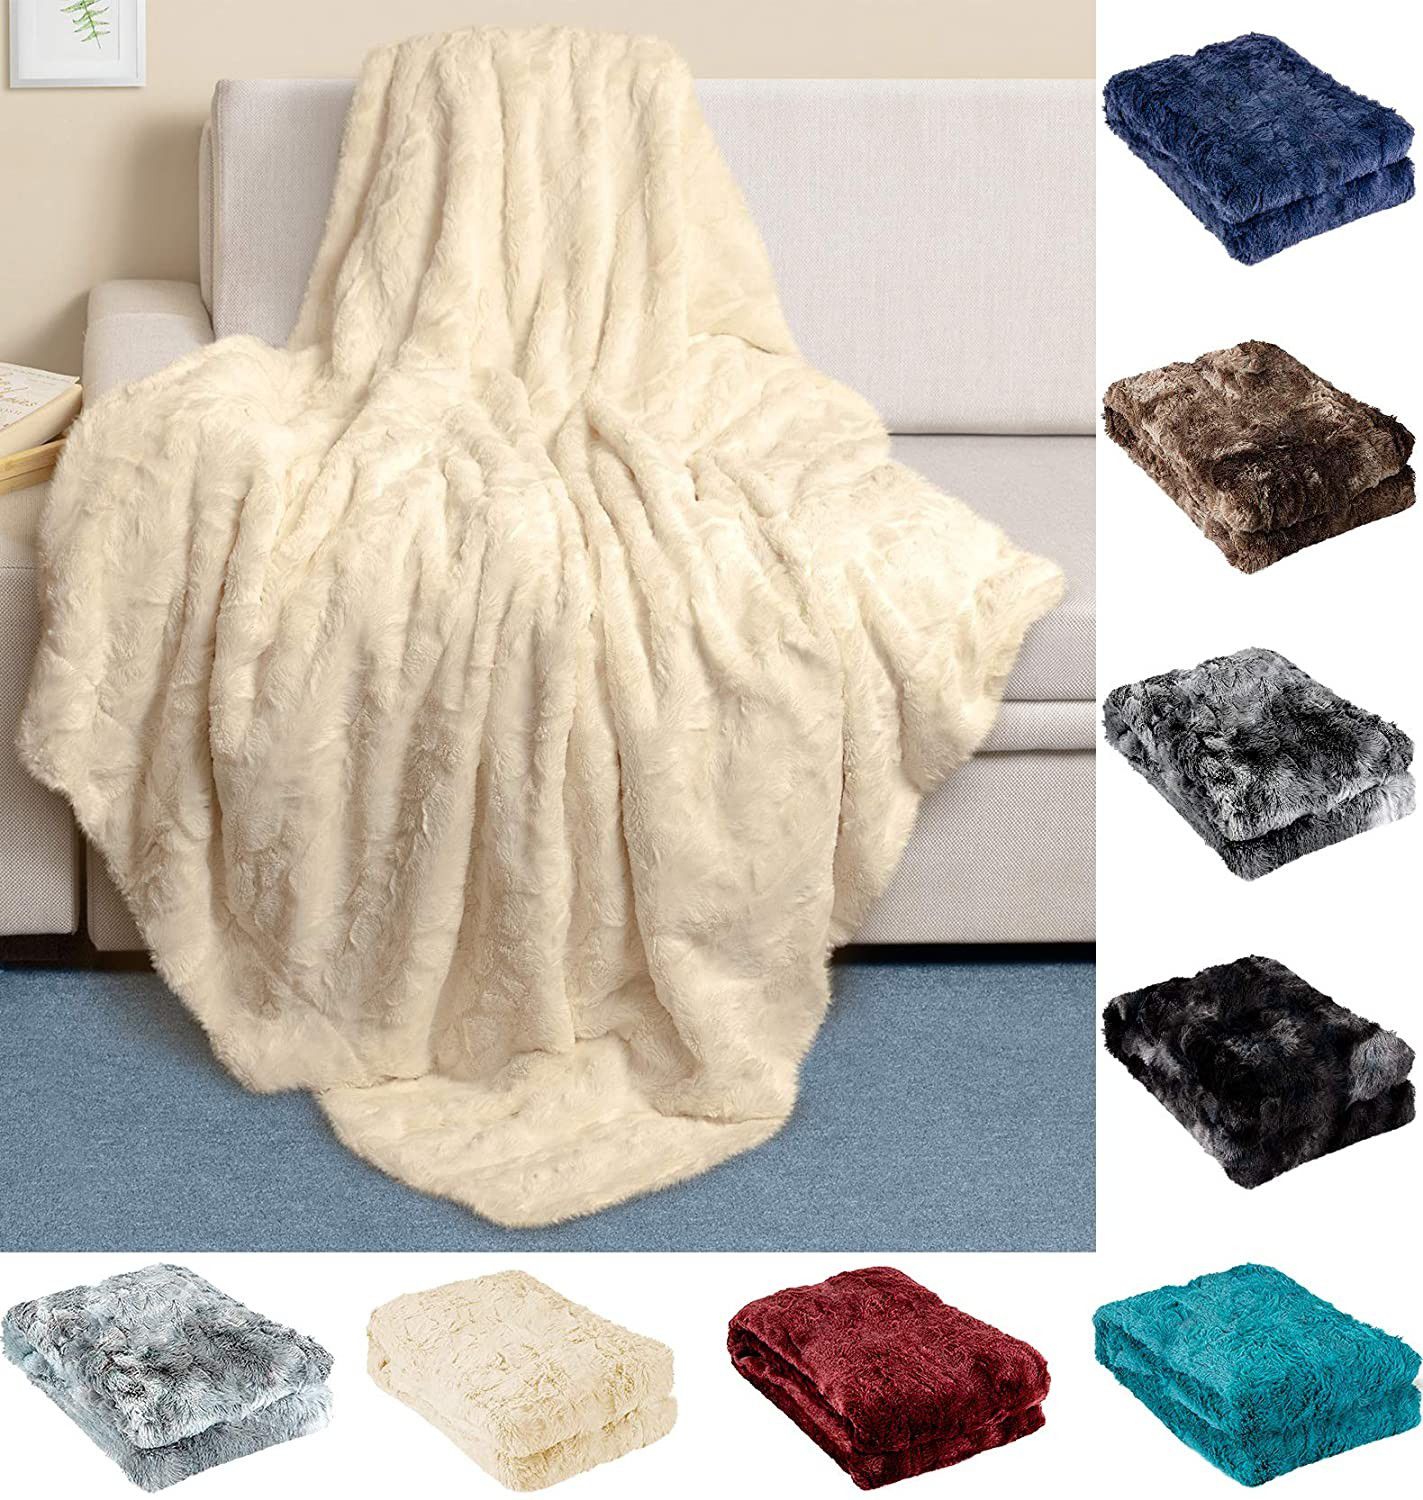 Luxury Faux Fur Throw Blanket - Ultra Soft and Fluffy - Plush Blankets for Couch Bed & Living Room - Fall Winter & Spring - 50x65 (Full Size) Ivory